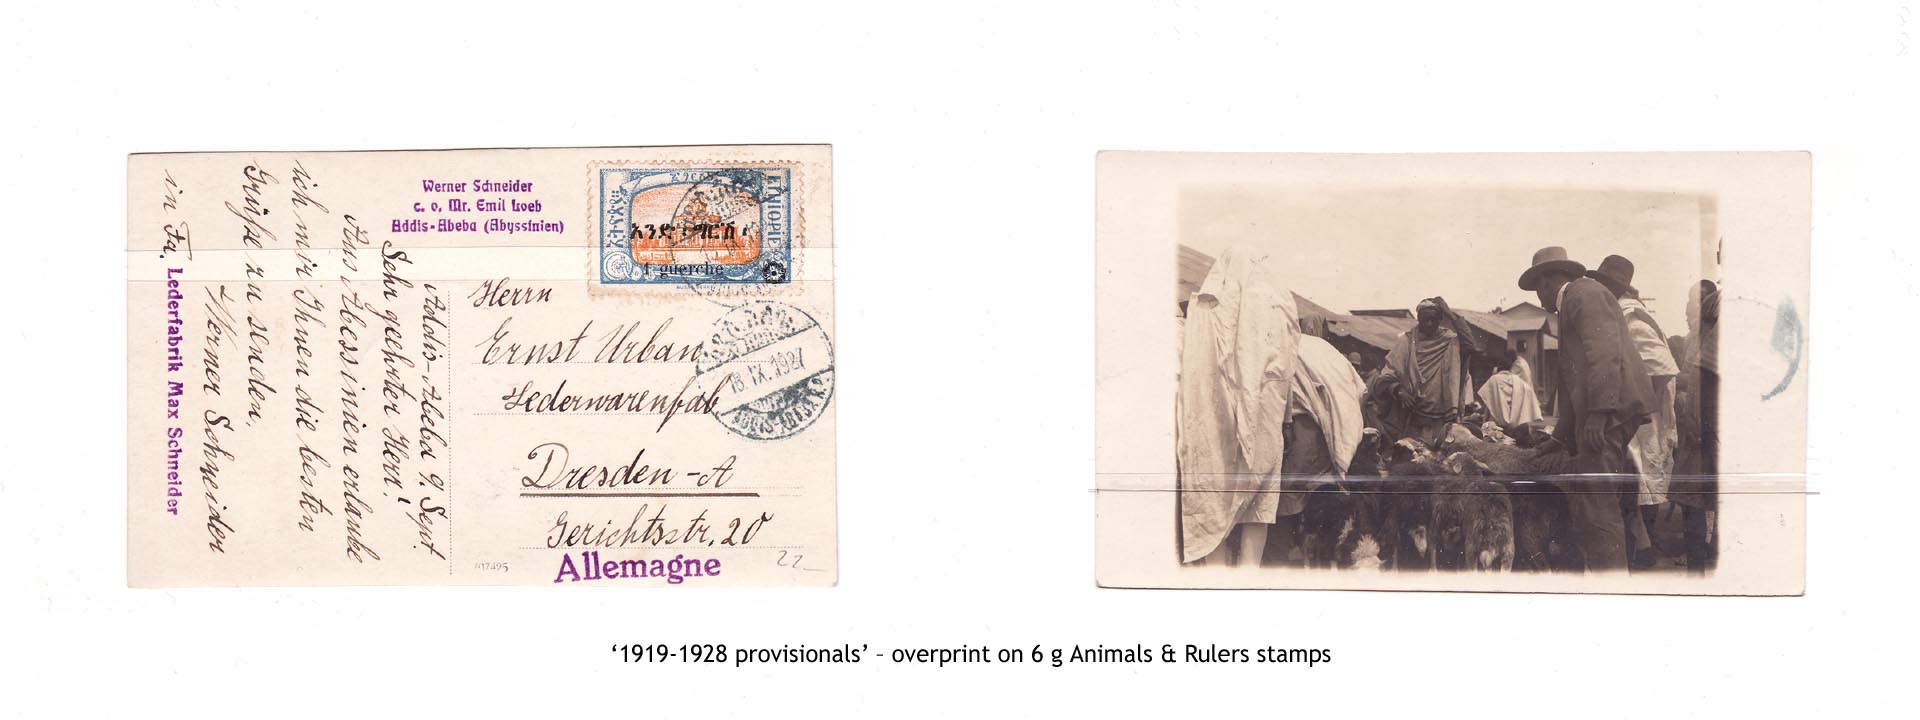 1919-1928 provisionals’ – overprint on 6 g Animals & Rulers stamps